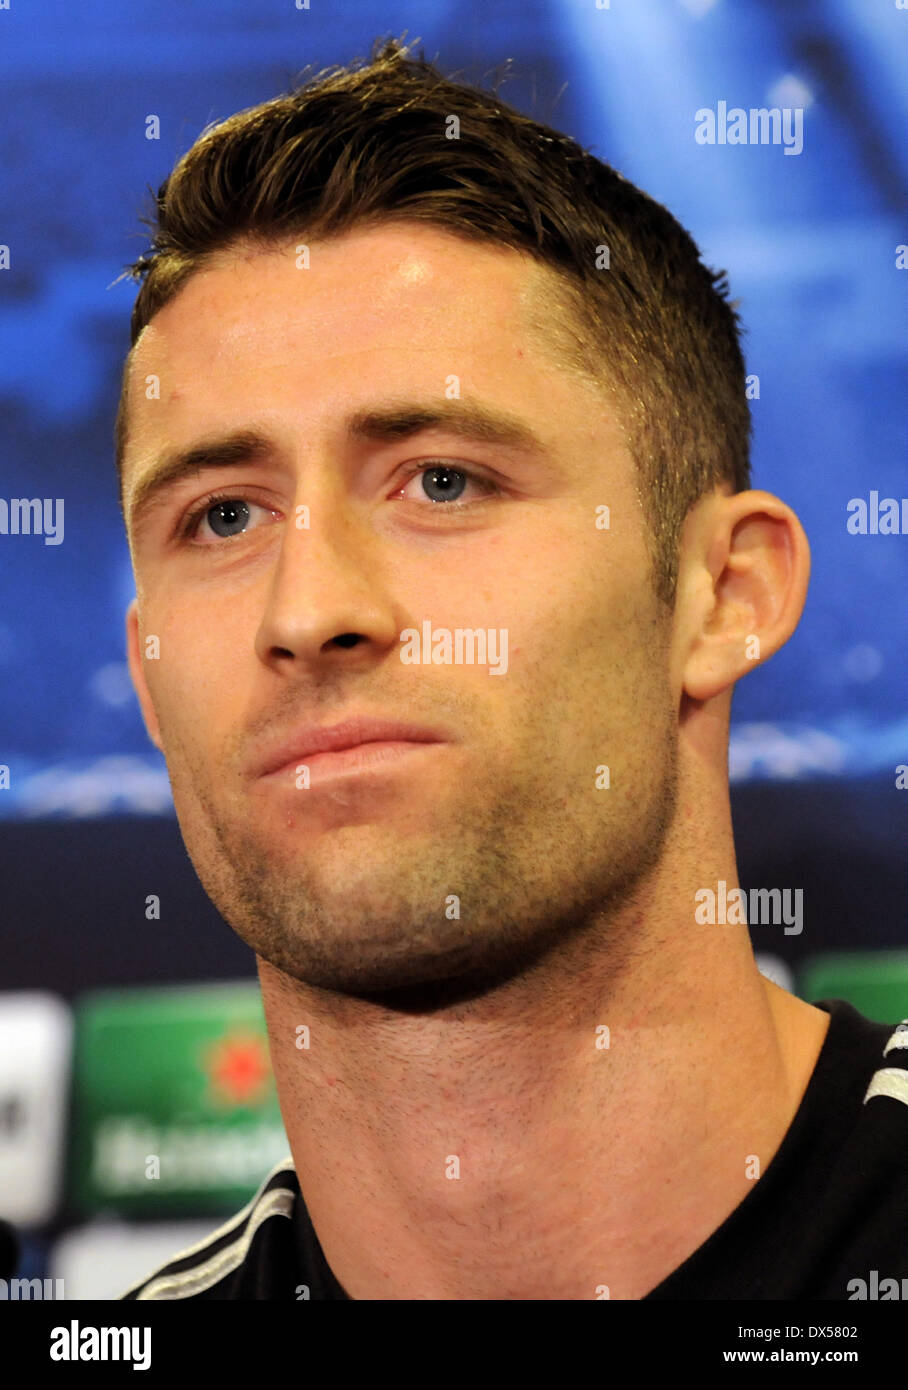 London, UK. 17 March 2014. Chelsea and England defender, Gary Cahill at the UEFA Champions League Press Conference at Stamford Bridge  before Chelsea's match vs Galatasaray on March 17th 2014 Credit:  KEITH MAYHEW/Alamy Live News Stock Photo